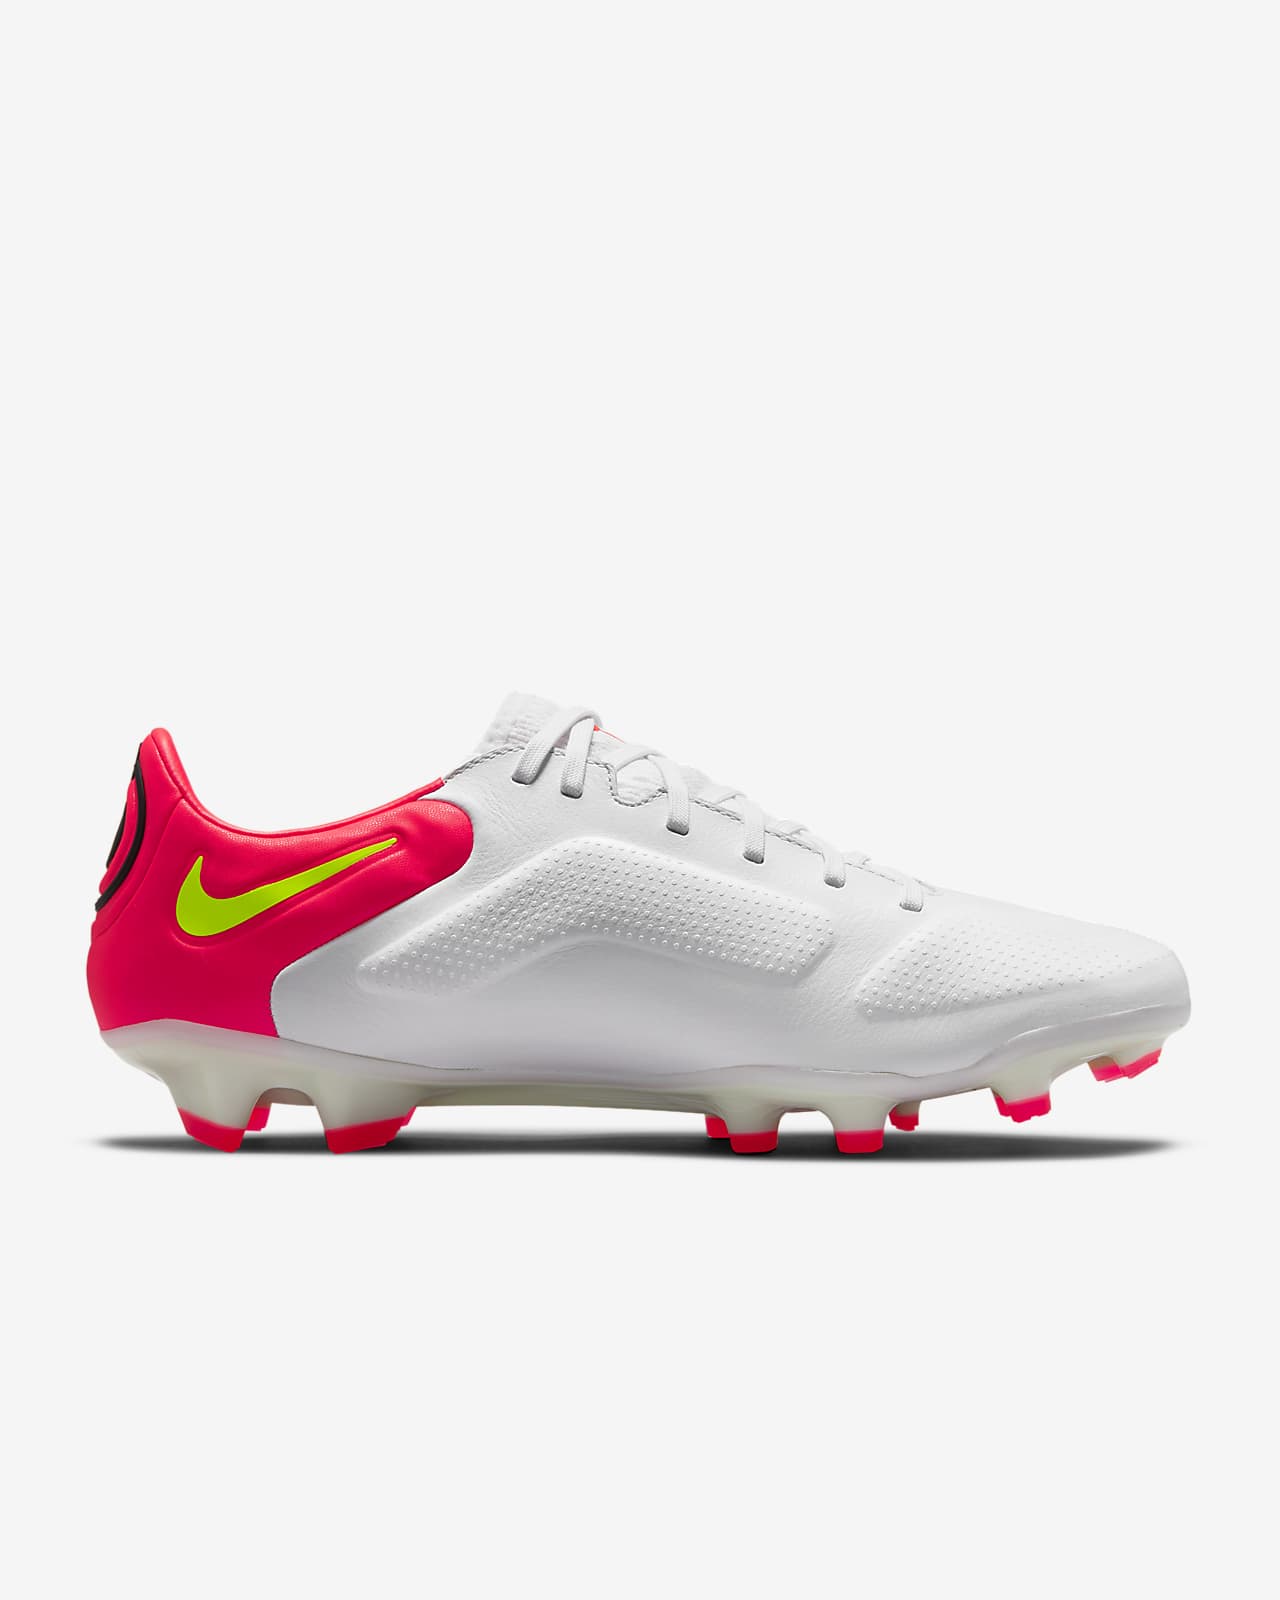 cheap nike tiempo soccer cleats